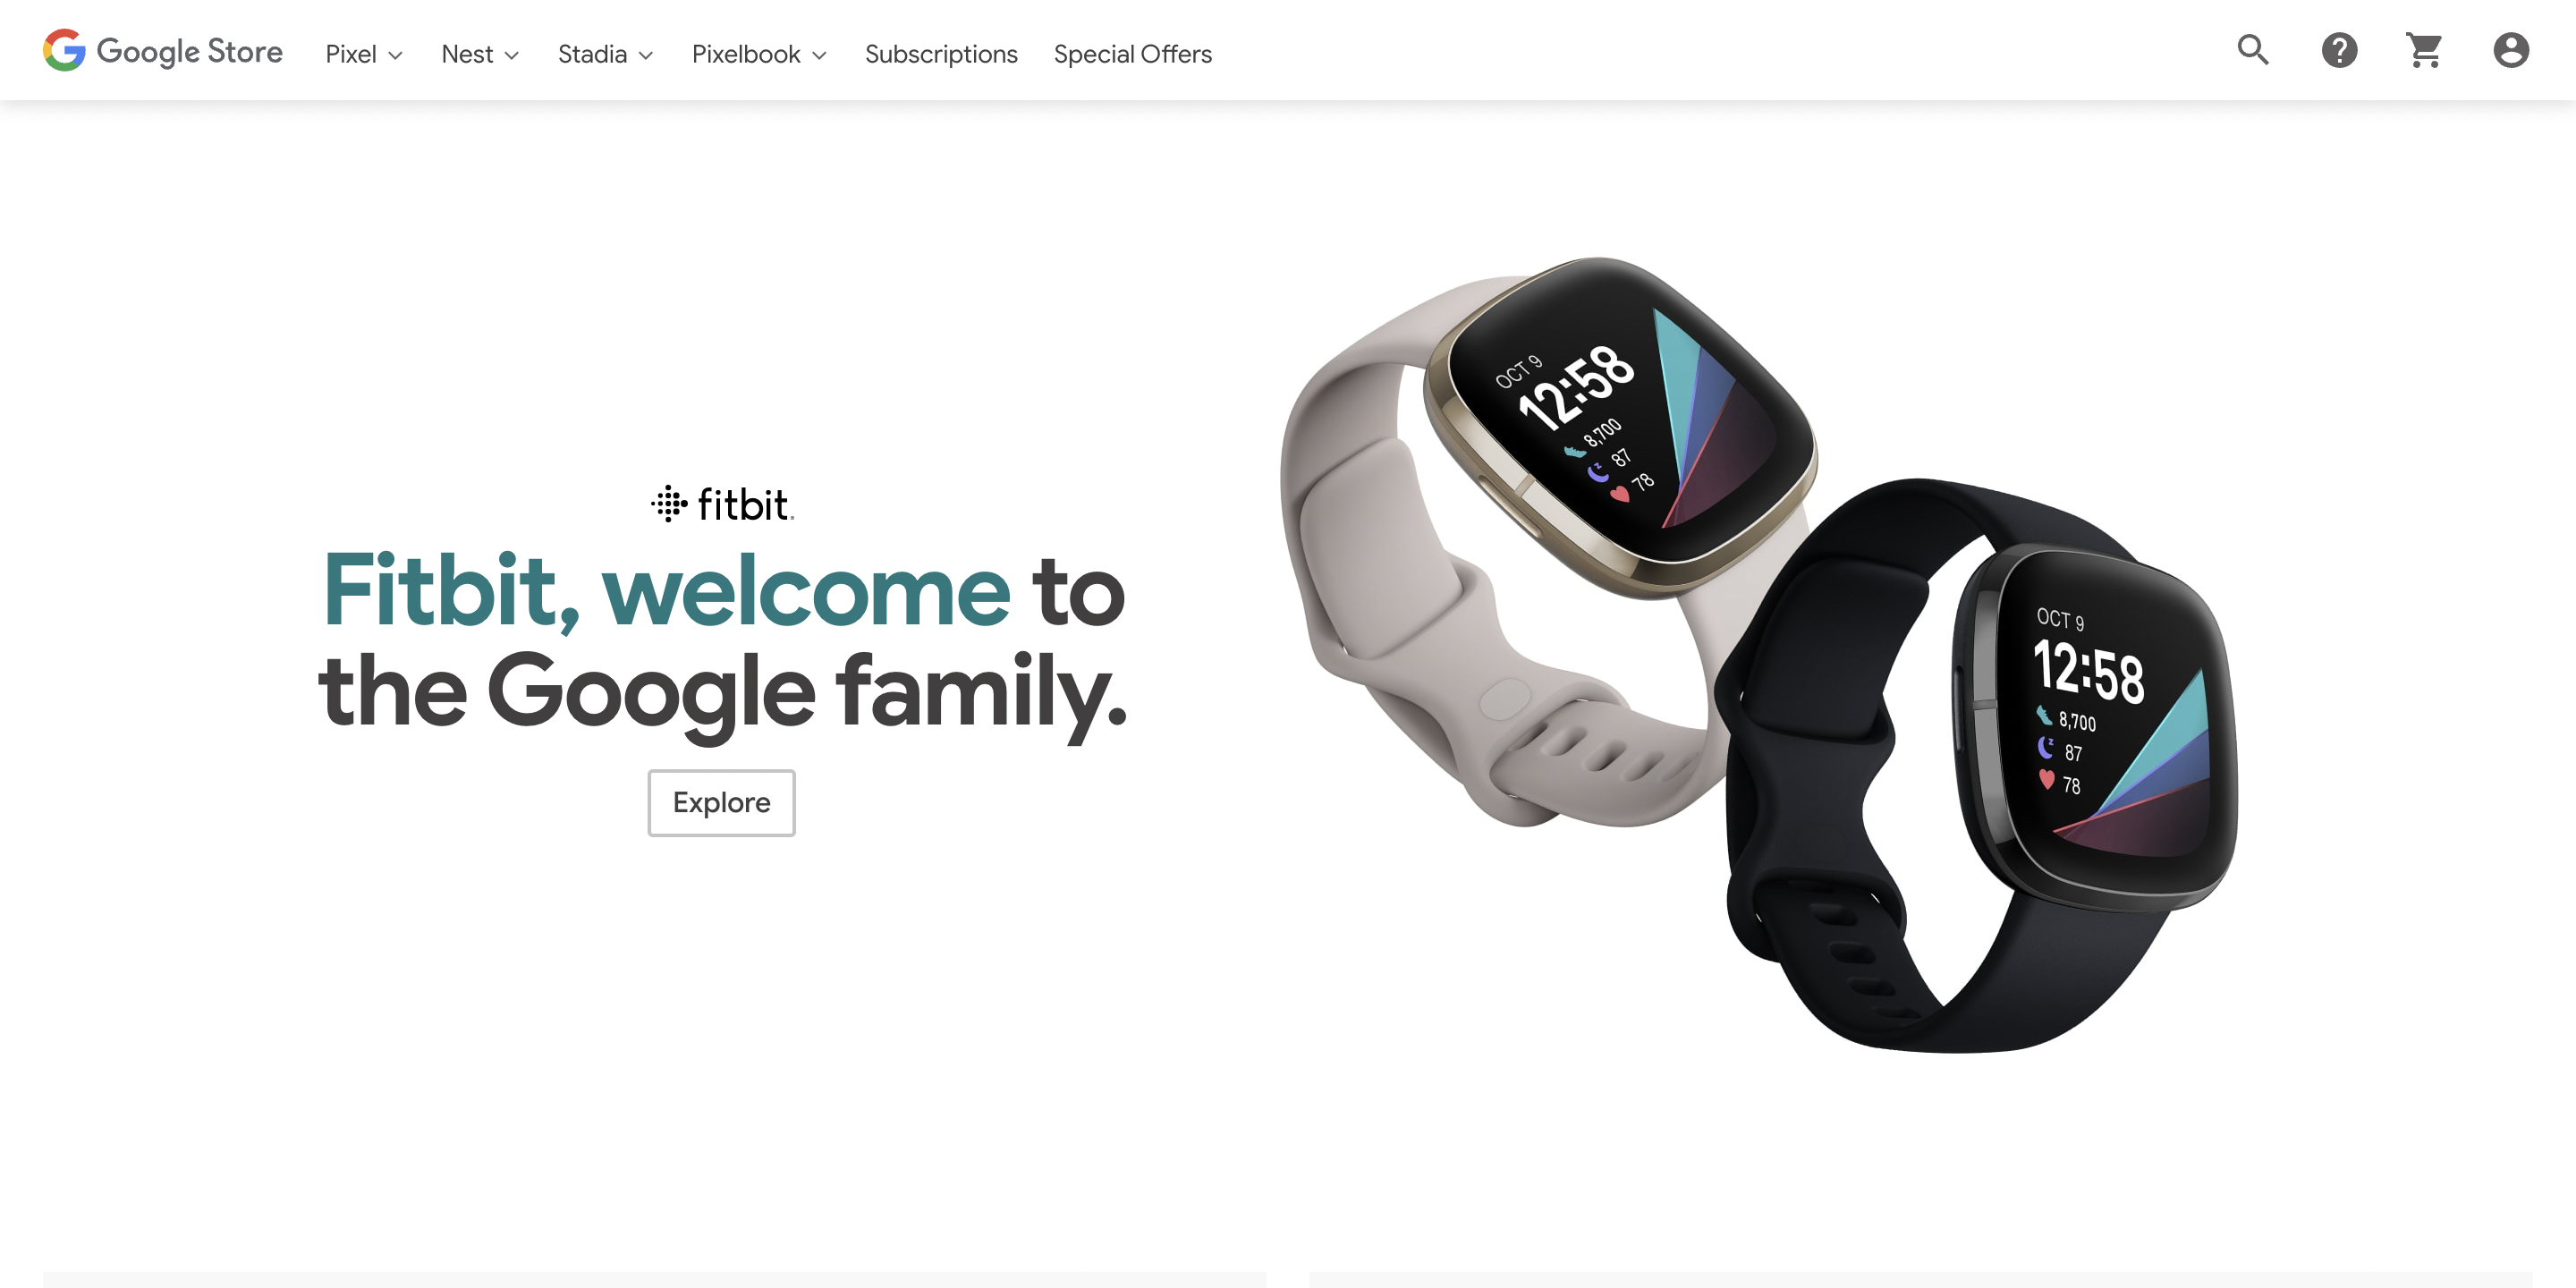 Google Store marks Fitbit acquisition 